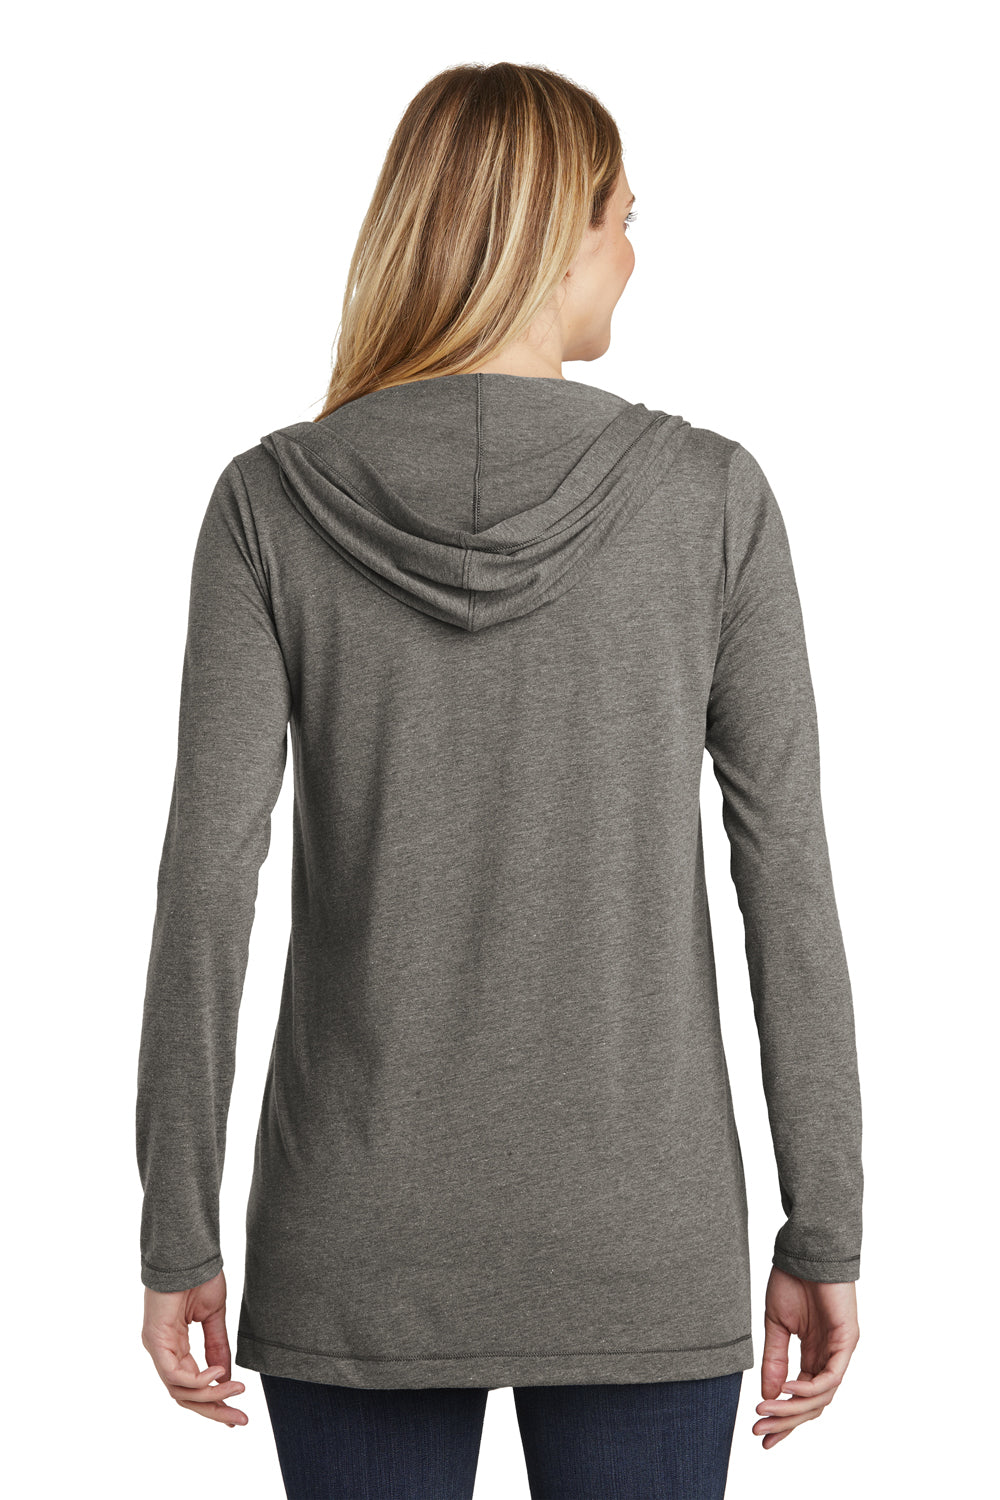 District DT156 Womens Perfect Tri Hooded Cardigan Sweater Grey Back